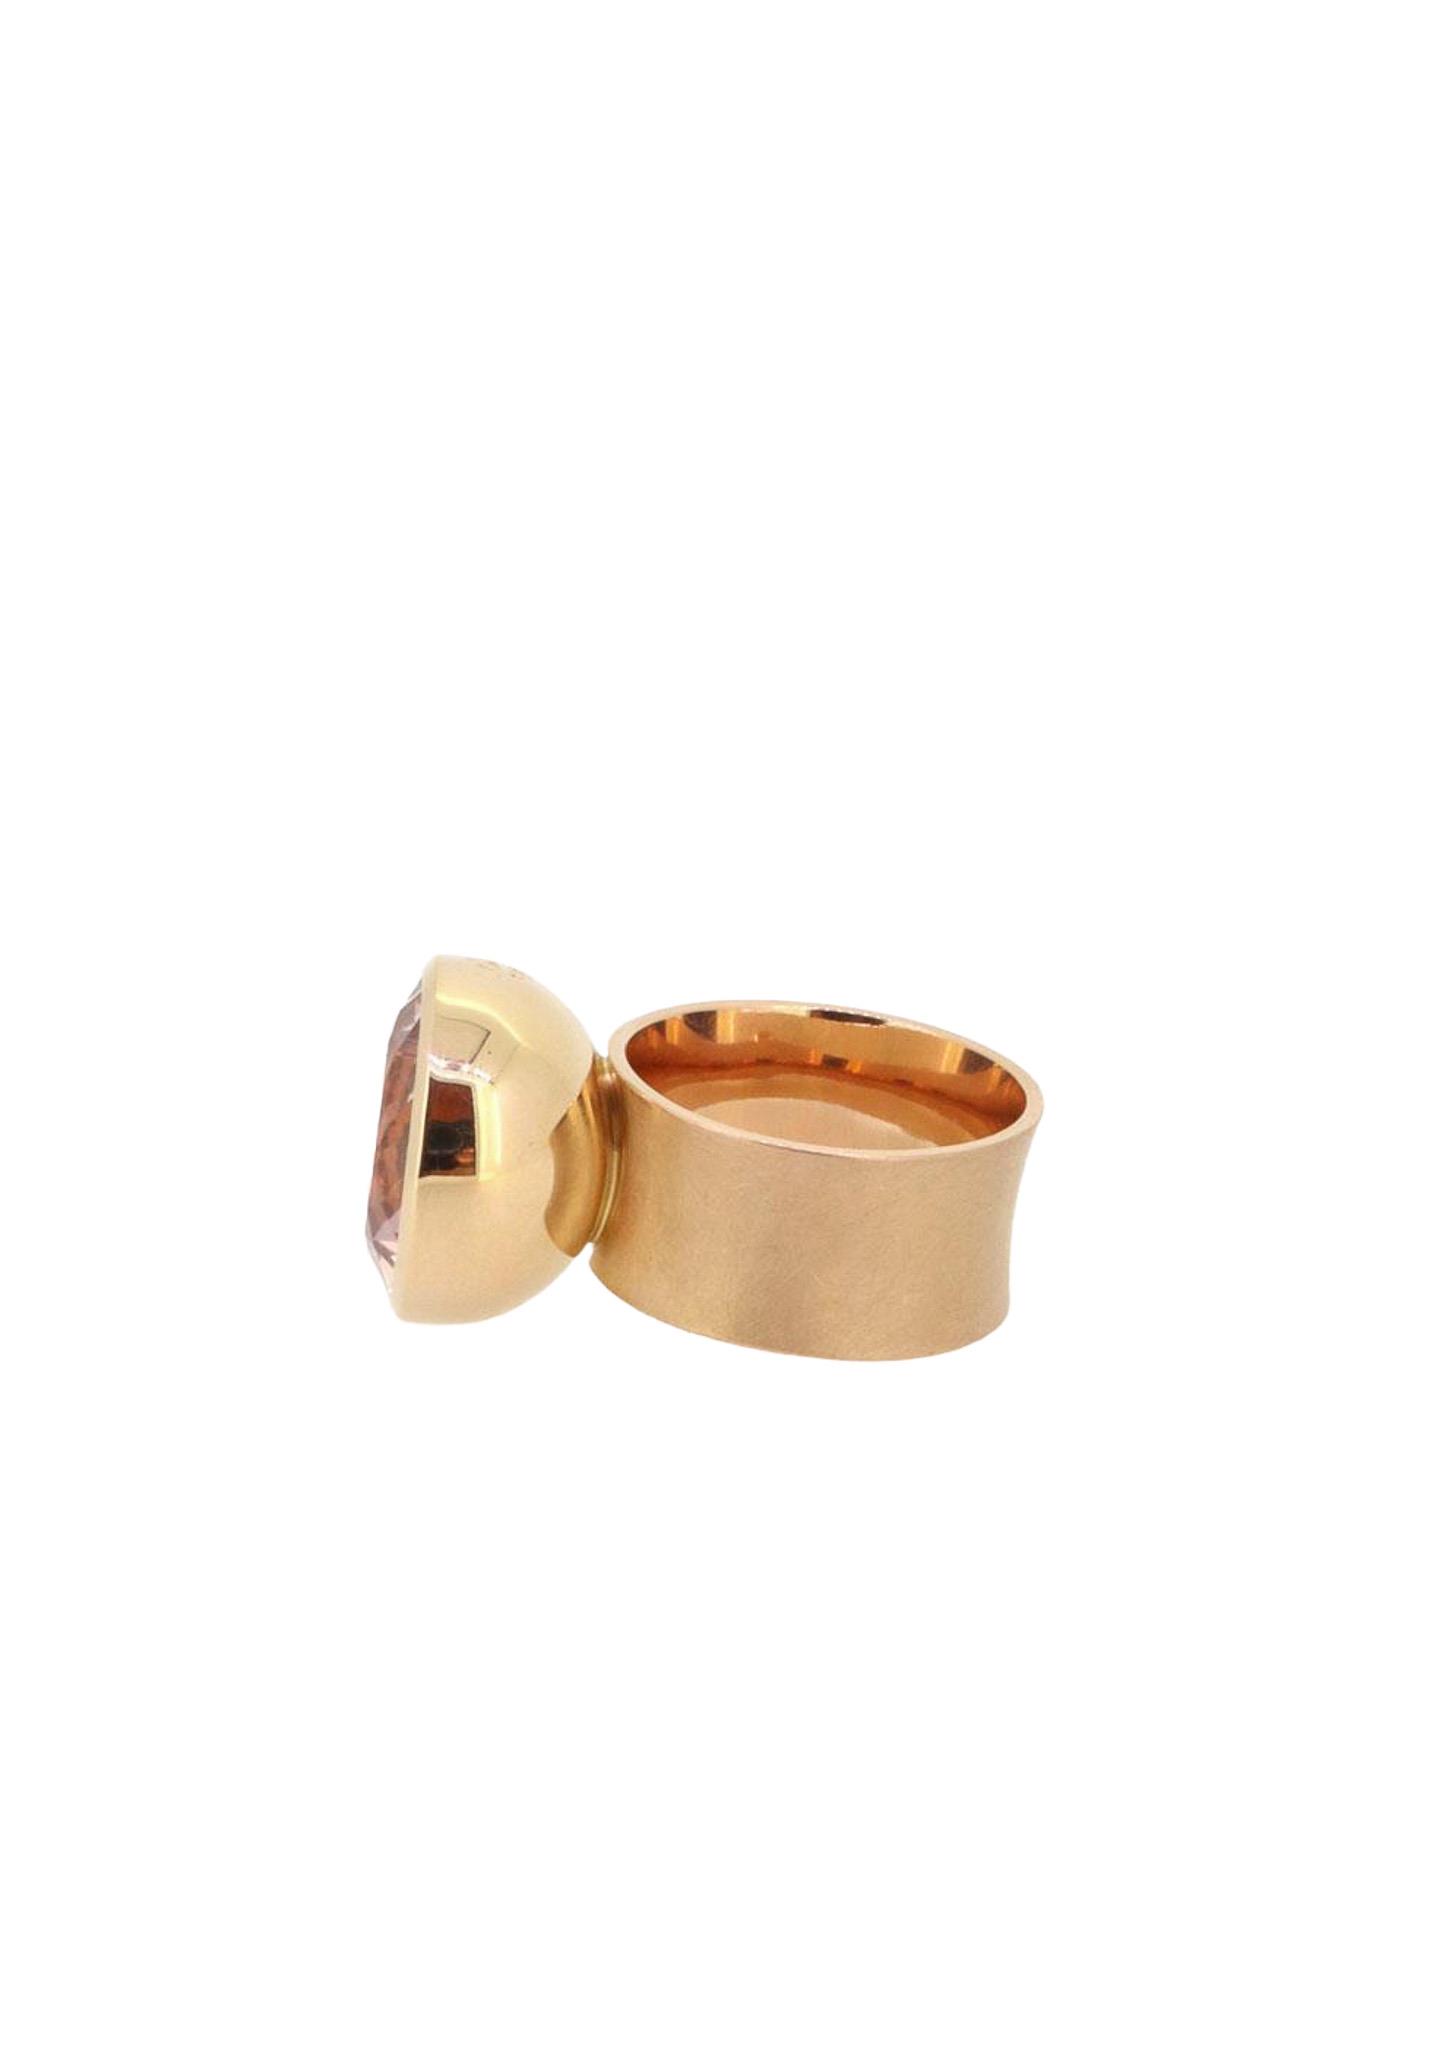 Ring Pokal Morganit 16mm Rotgold - Georg Spreng - 422spre03-6A